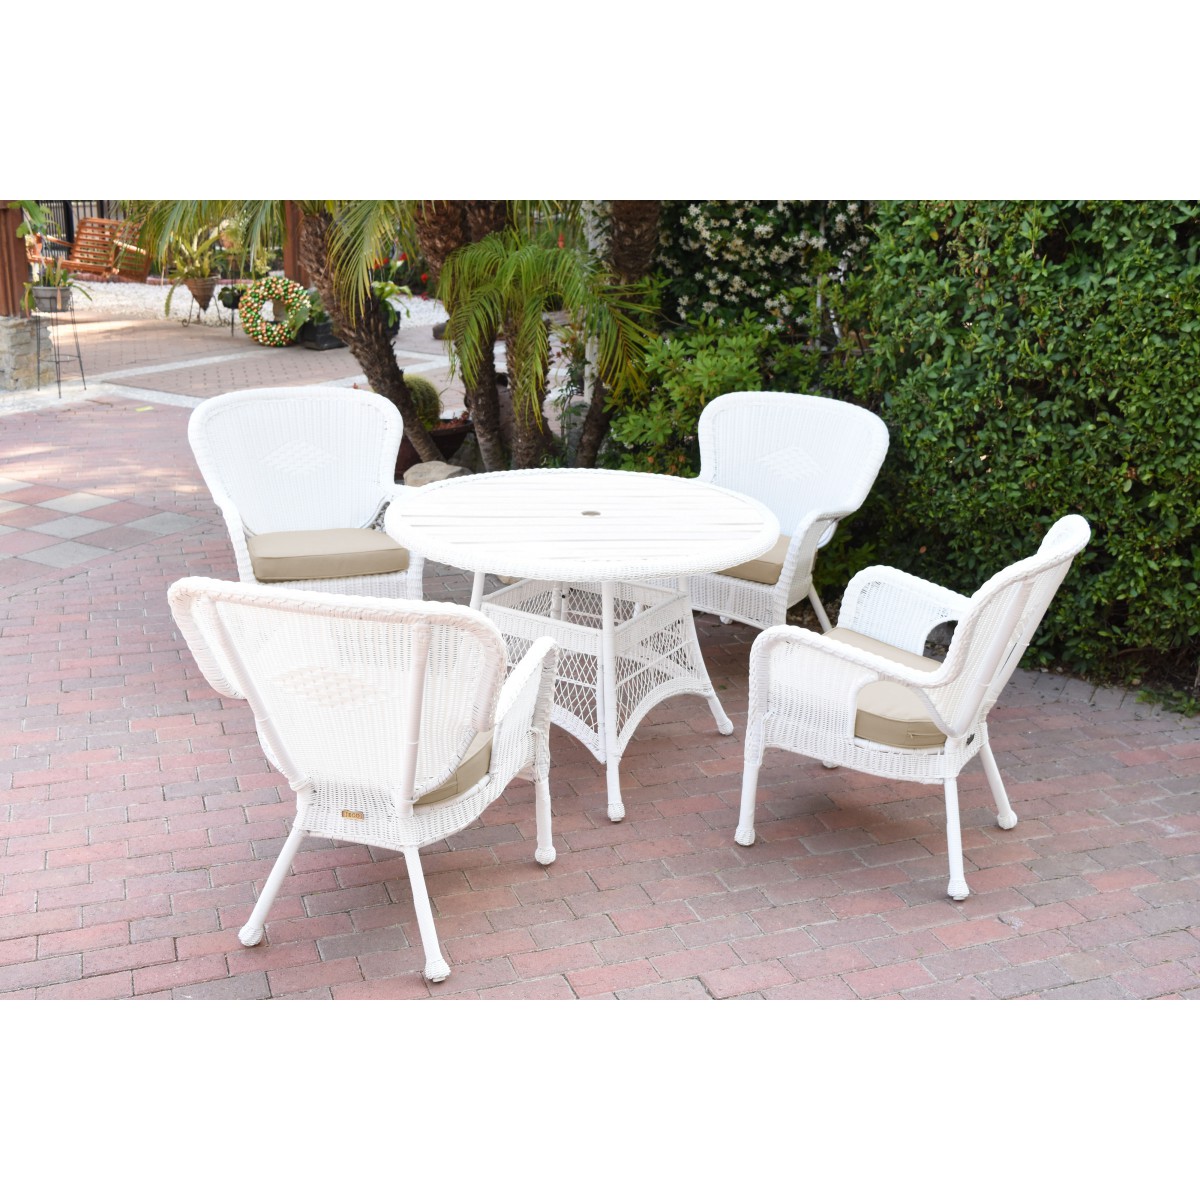 5pc Windsor white wicker dining set with faux wood top and 3 Inch tan cushion (1 RD dinging